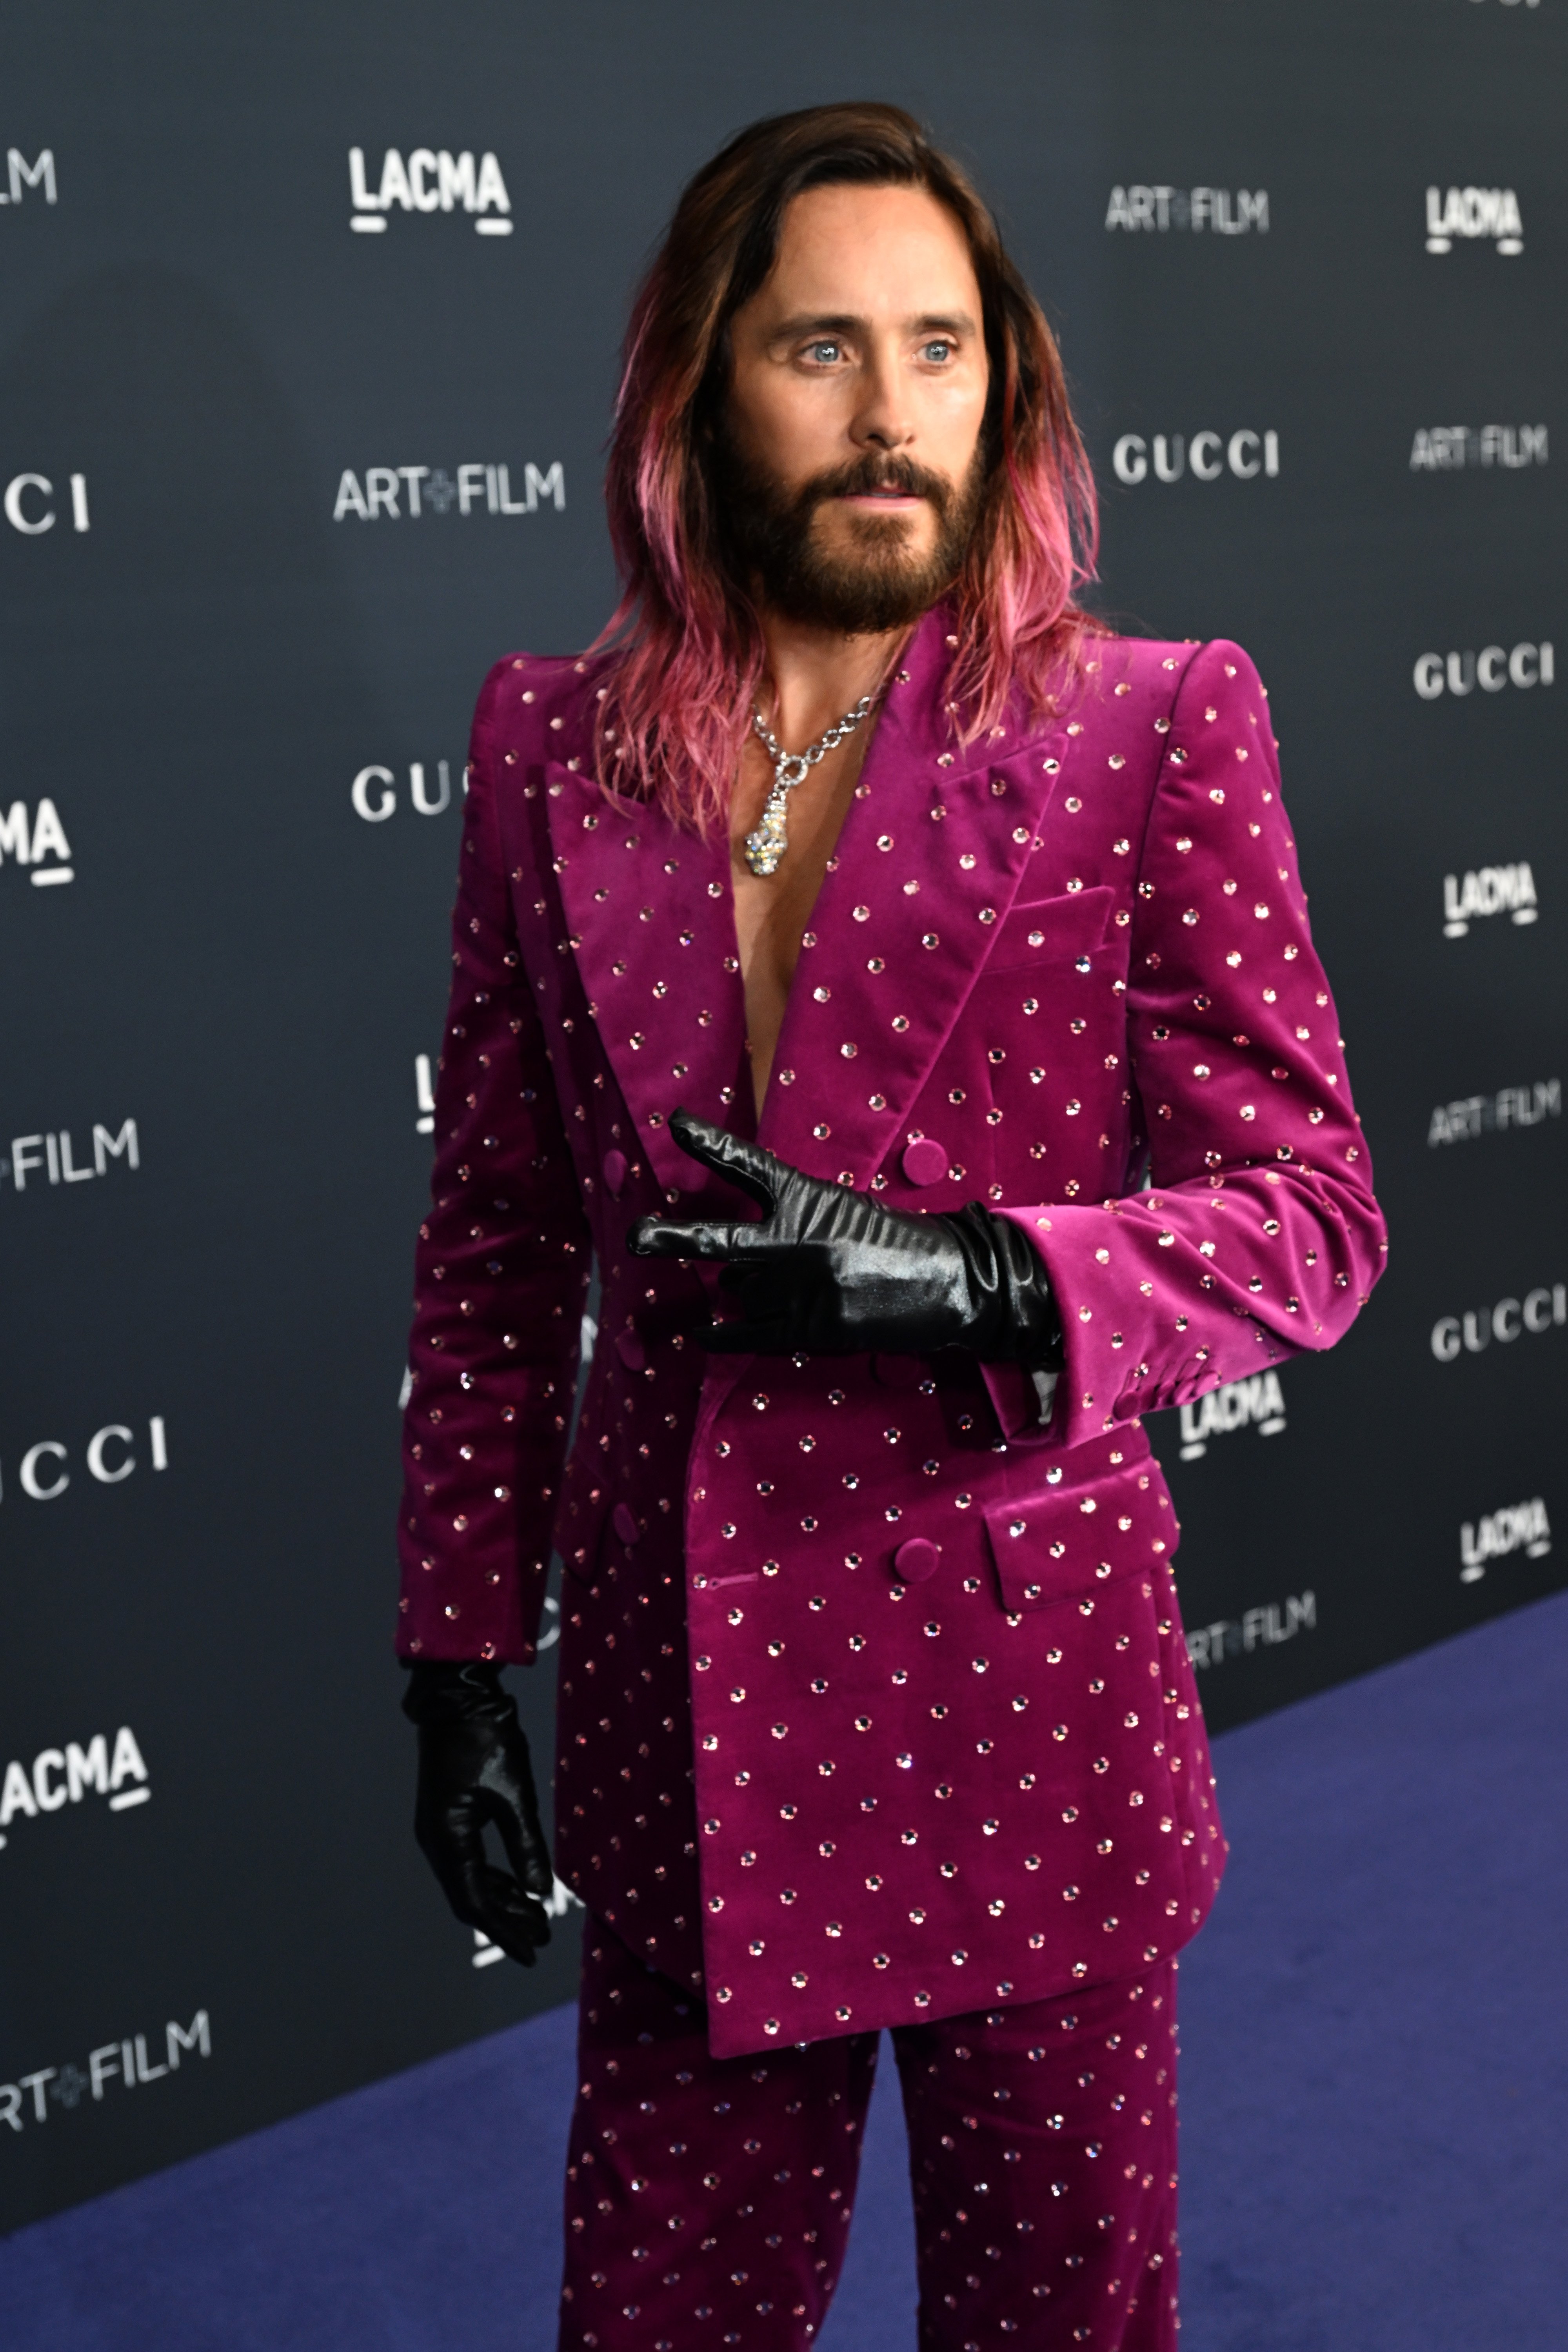 Jared Leto attends the 2022 LACMA ART+FILM GALA Presented By Gucci at Los Angeles County Museum of Art on November 05, 2022 in Los Angeles, California. | Source: Getty Images 